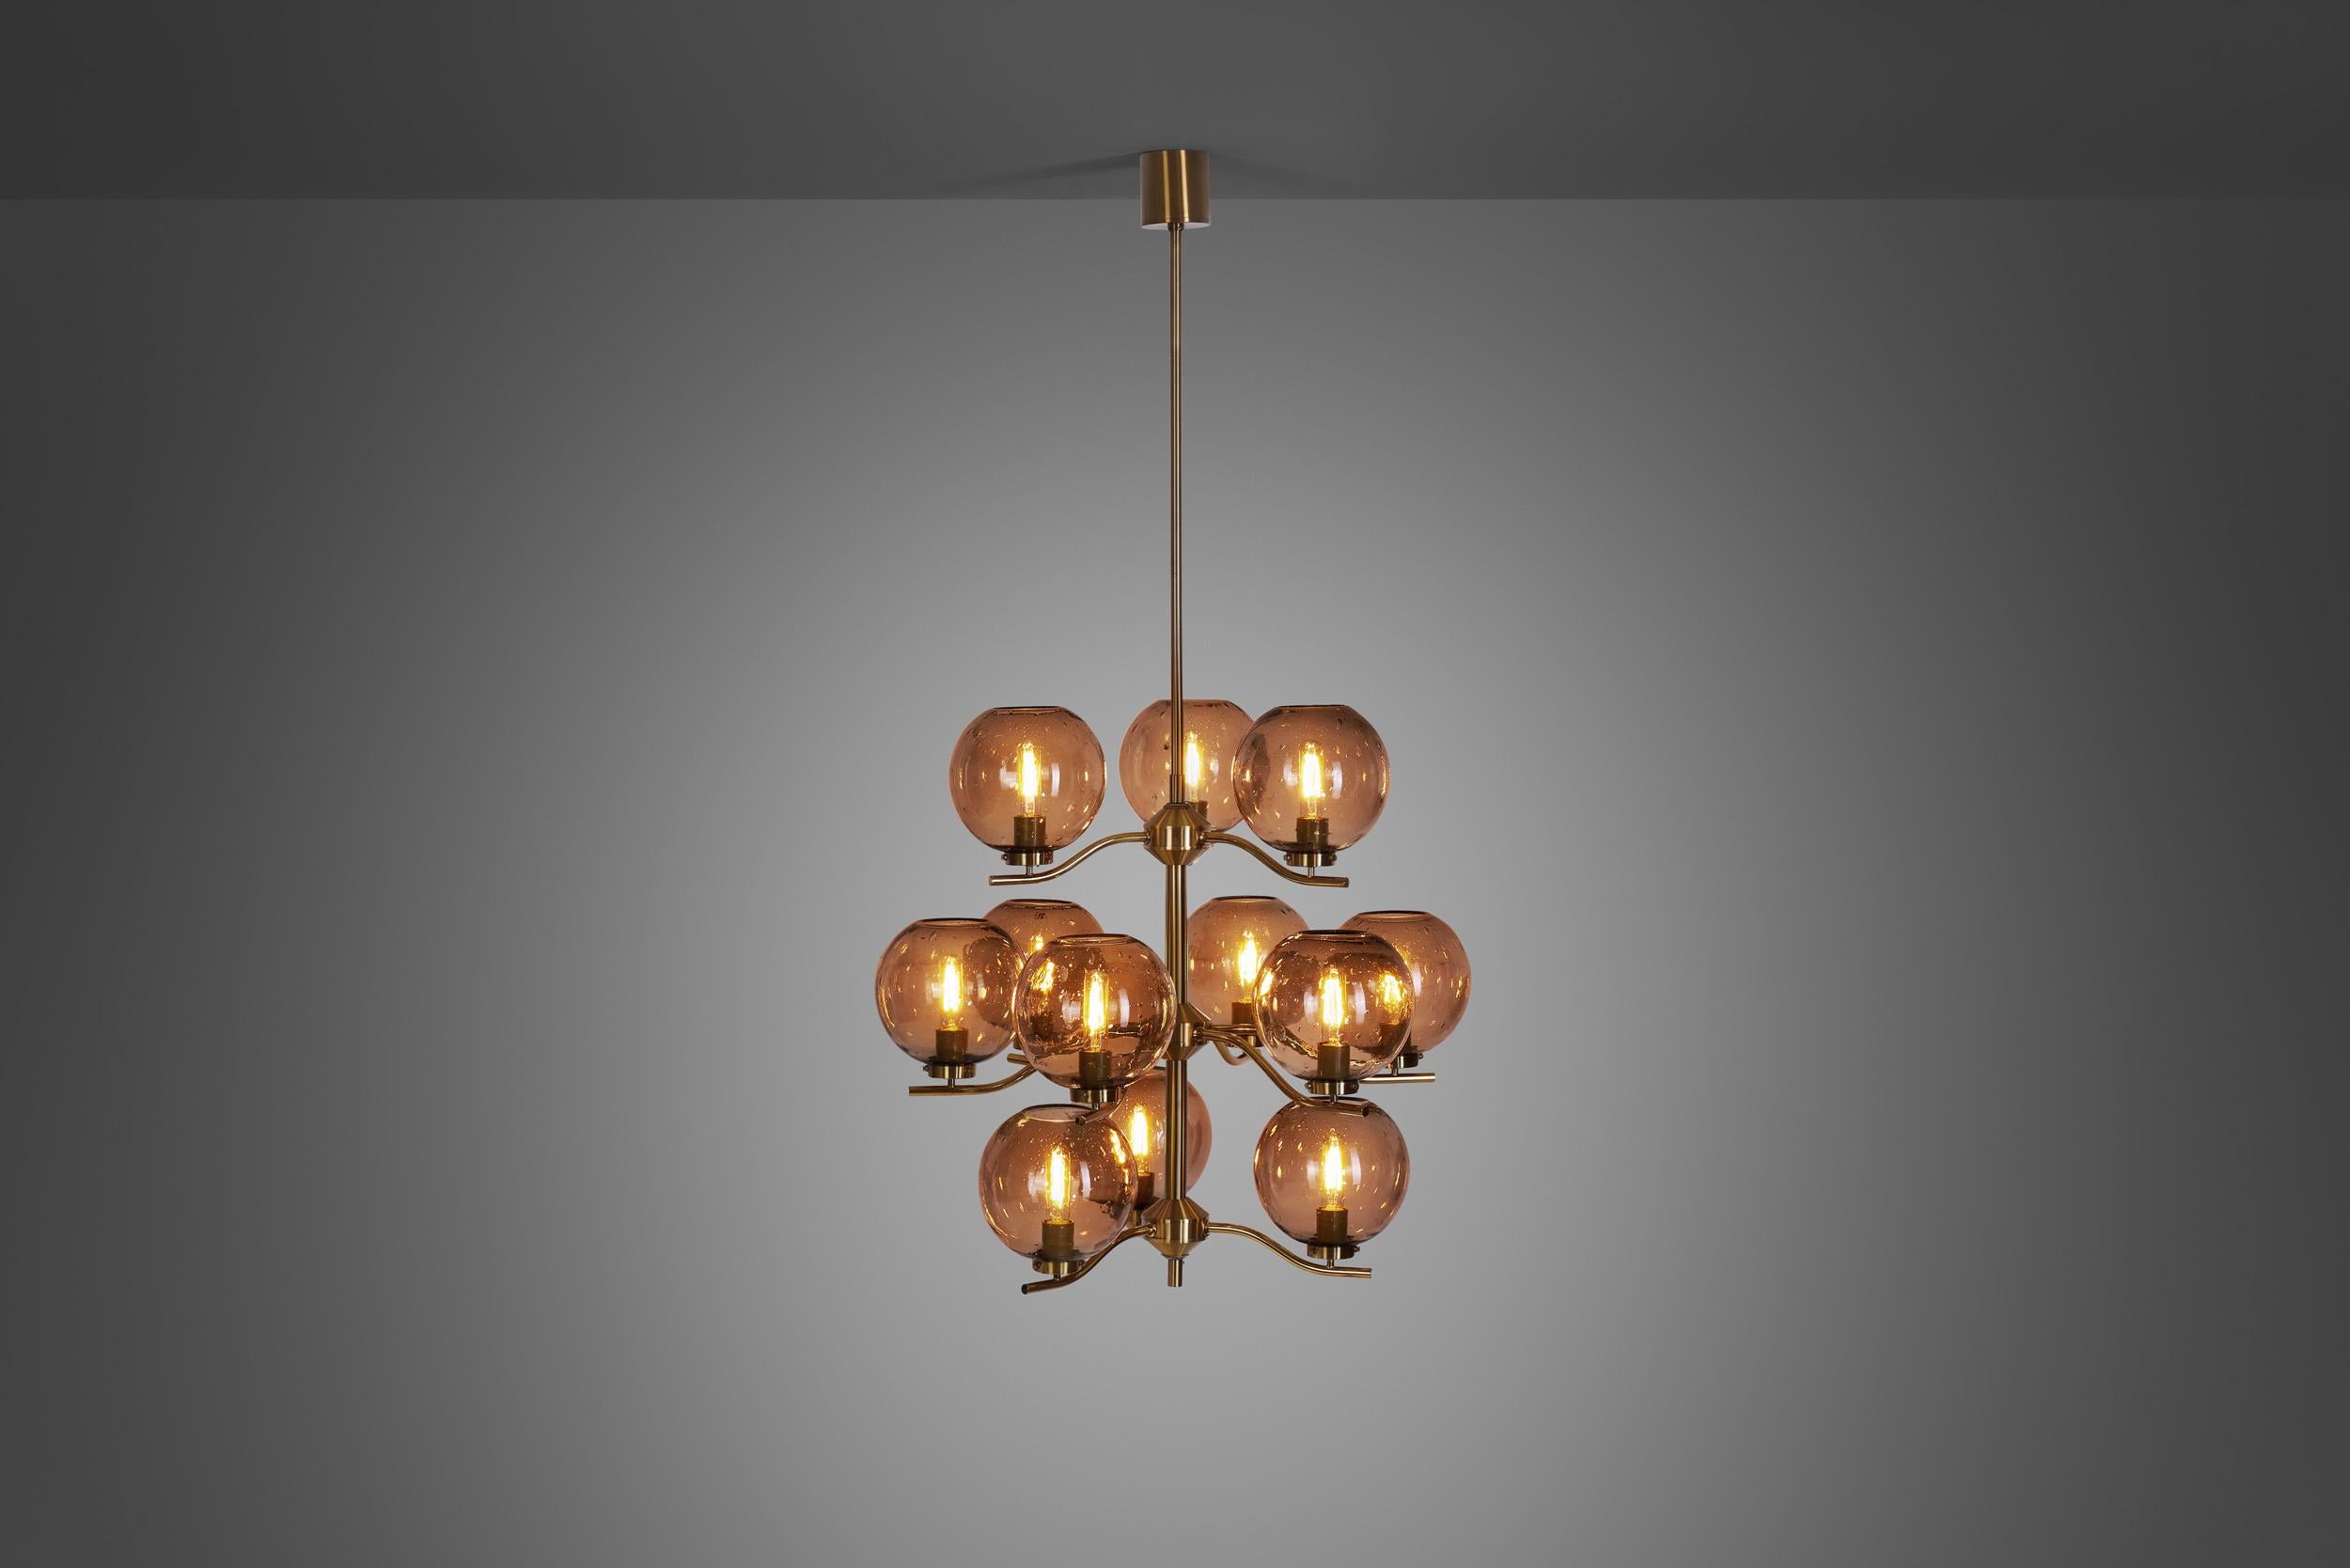 Late 20th Century Holger Johansson Brass Chandelier with 12 Glass Shades for Westal, Sweden 1970s For Sale